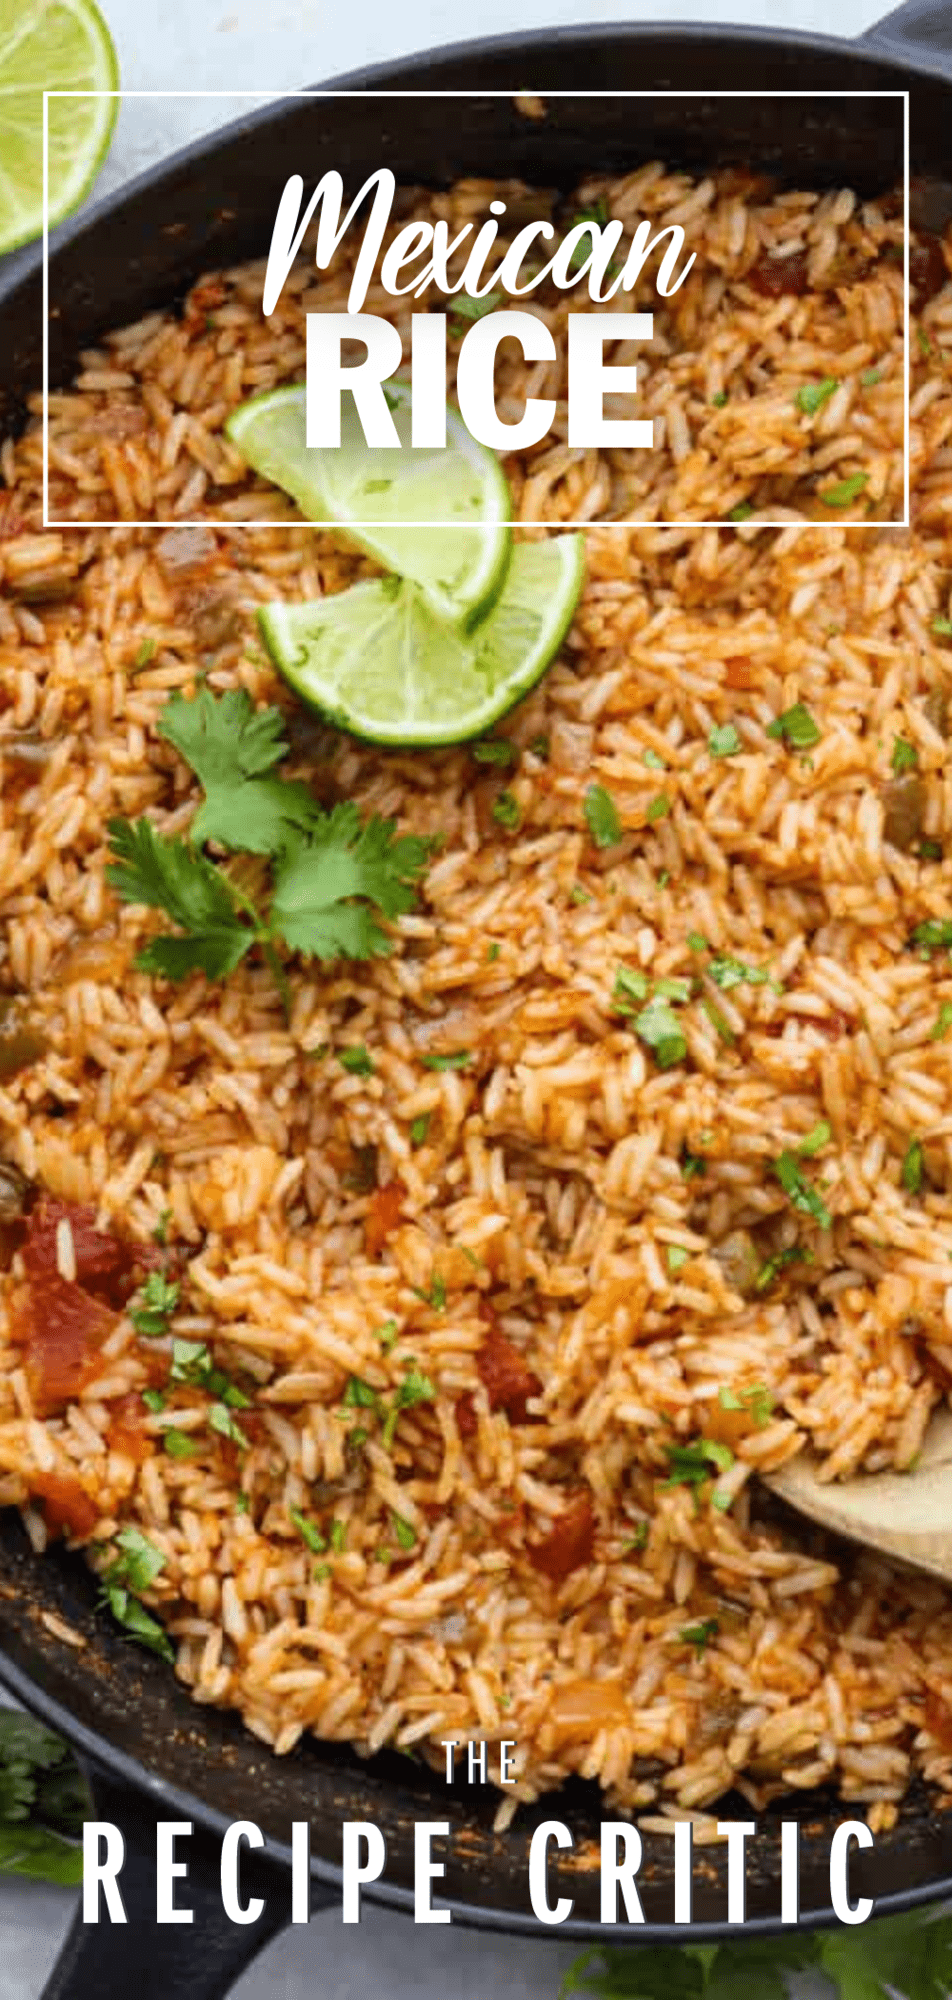 Restaurant Style Mexican Rice | The Recipe Critic | Mexican Rice Pinterest